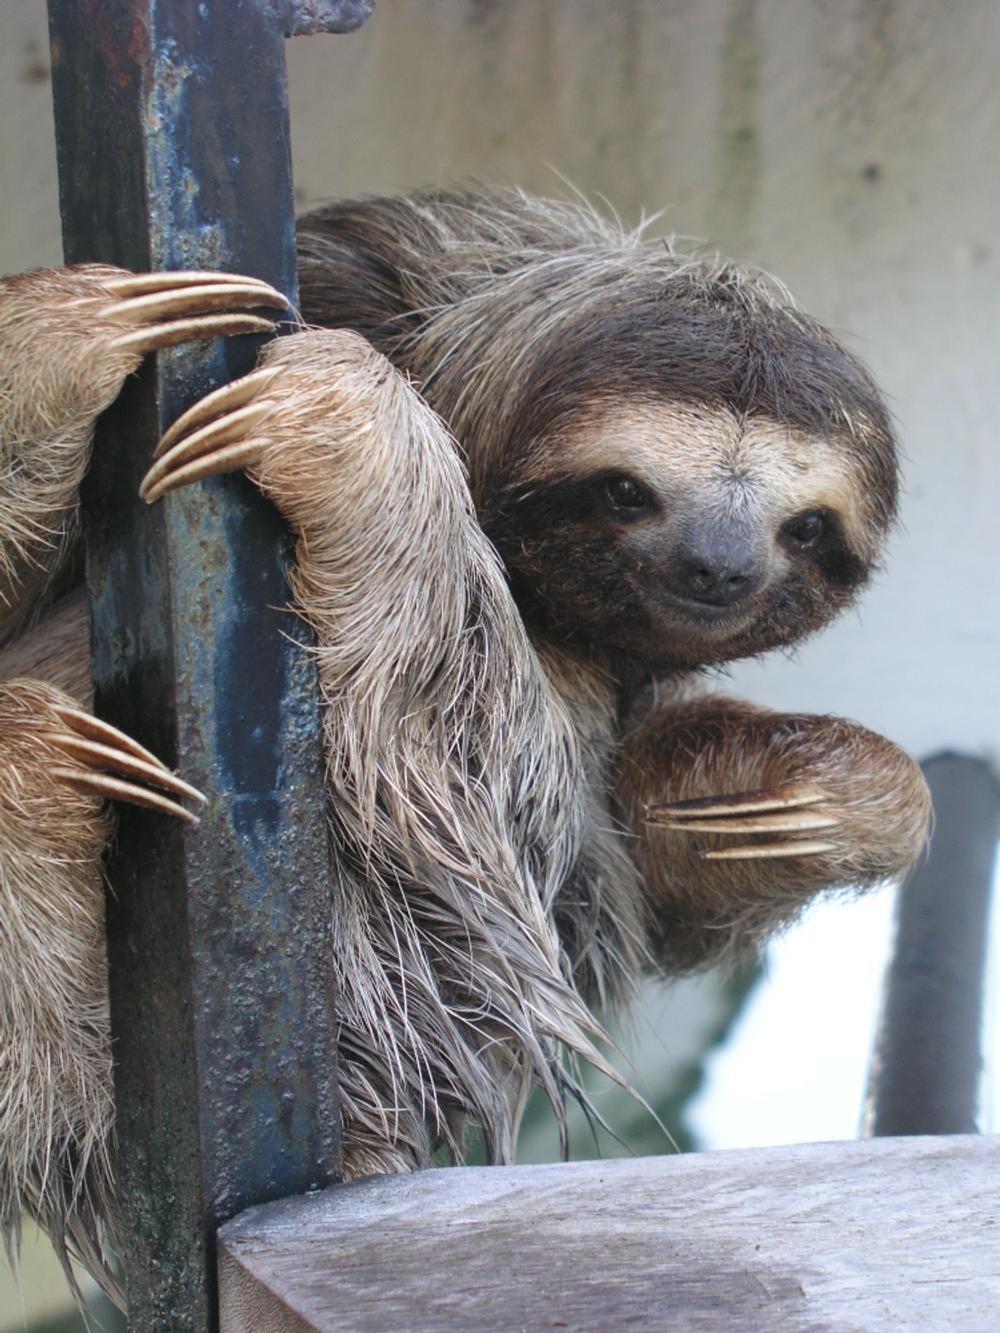 Sloth in Panama by Unknown